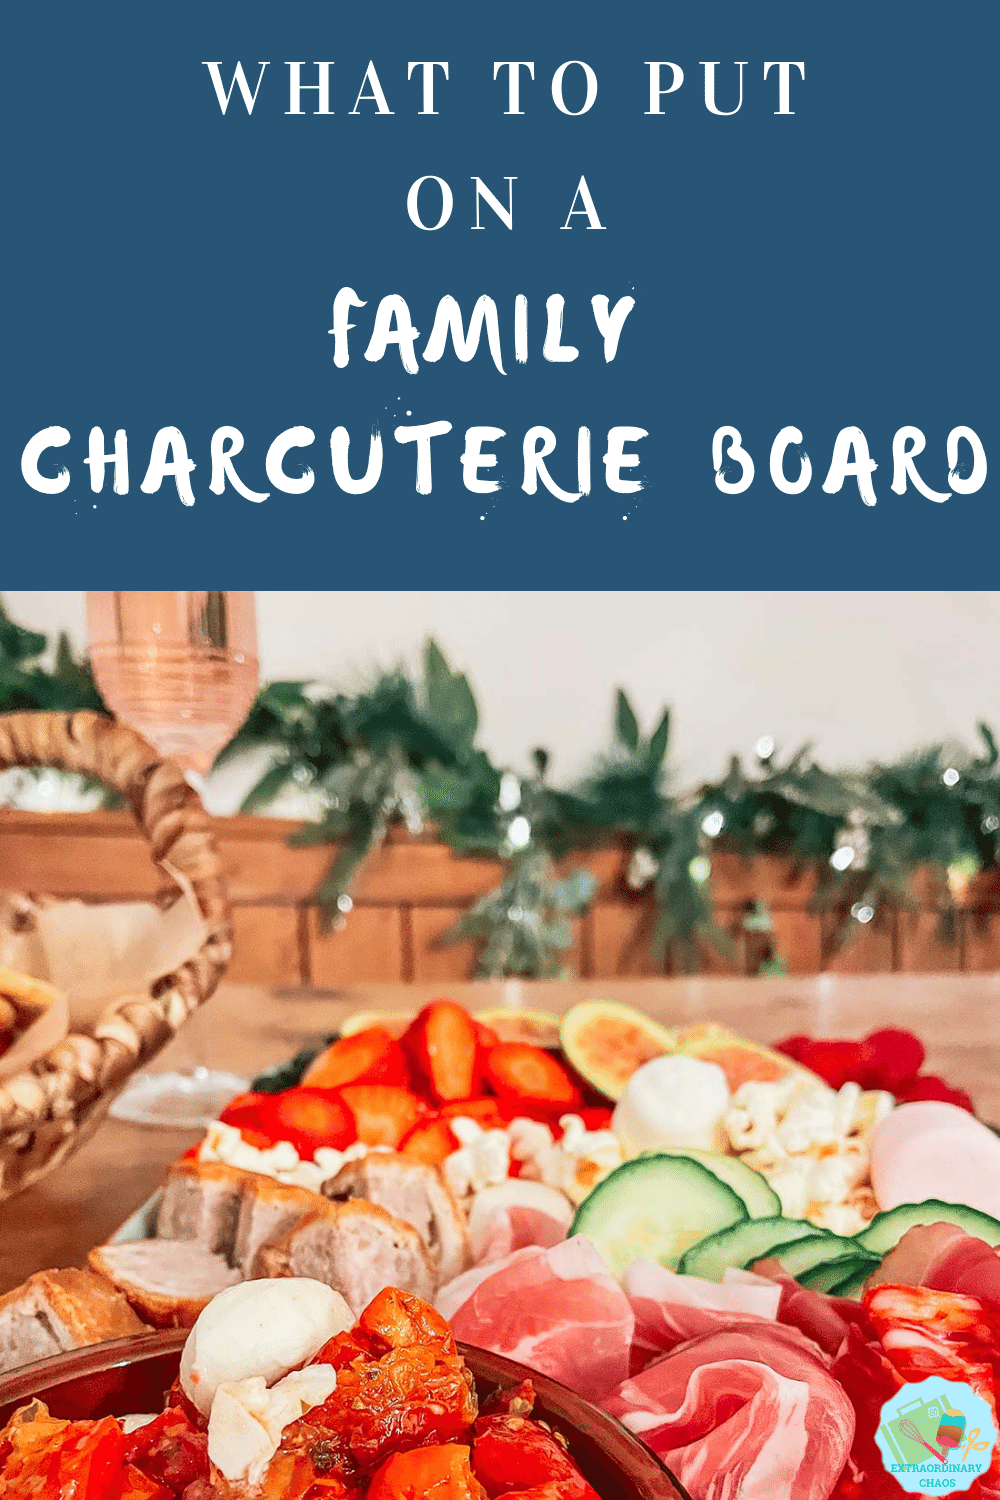 What to put on a family charcuterie board to suit the whole family when making a family sweet and savoury sharing platter